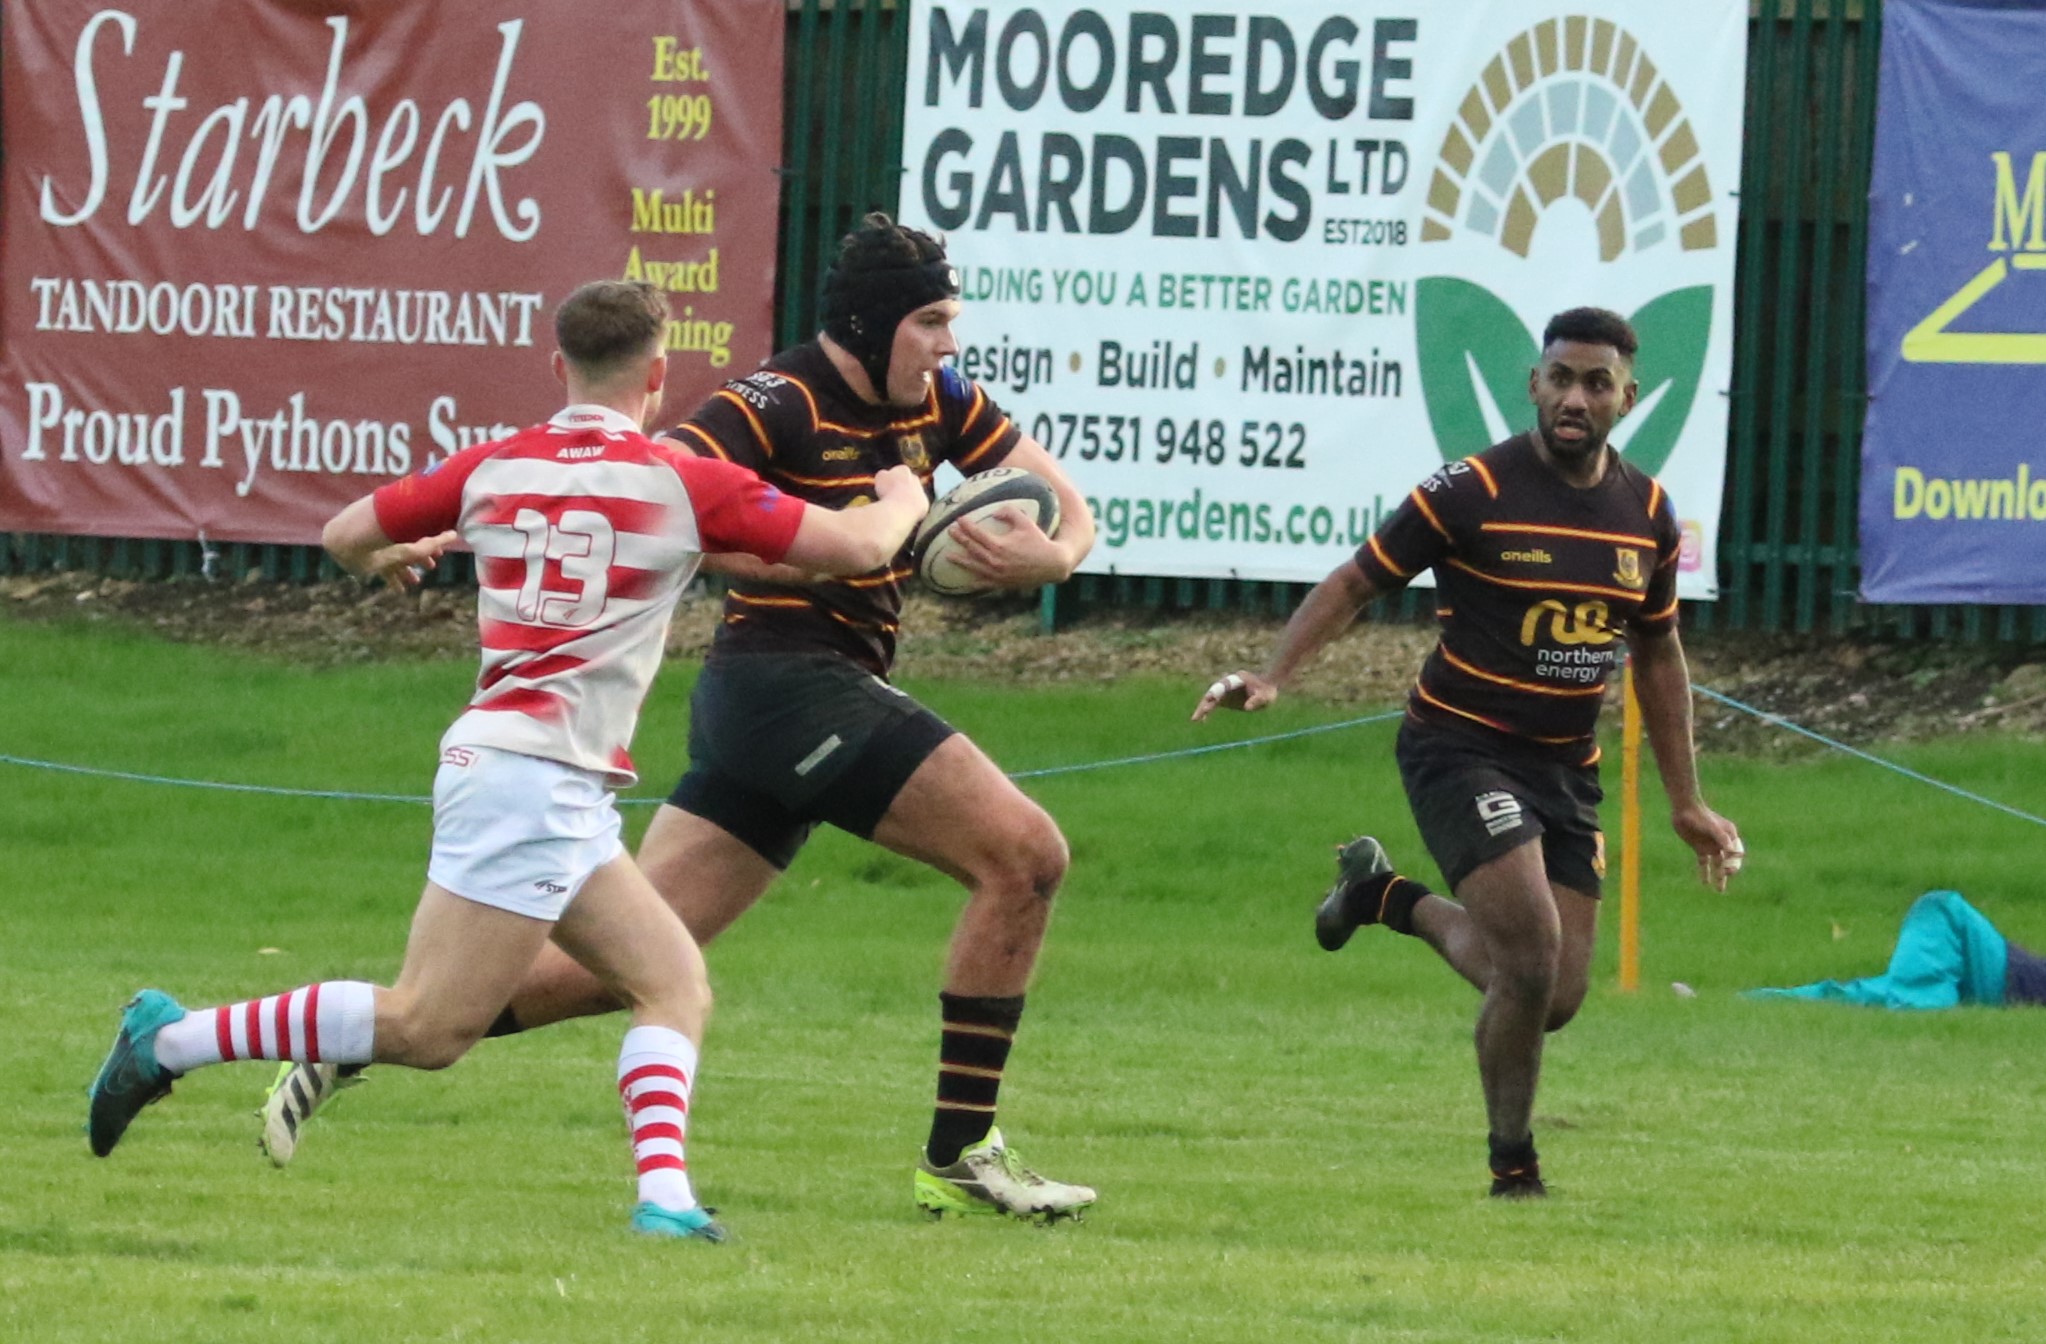 Wetherby take advantage of Pythons’ mistakes